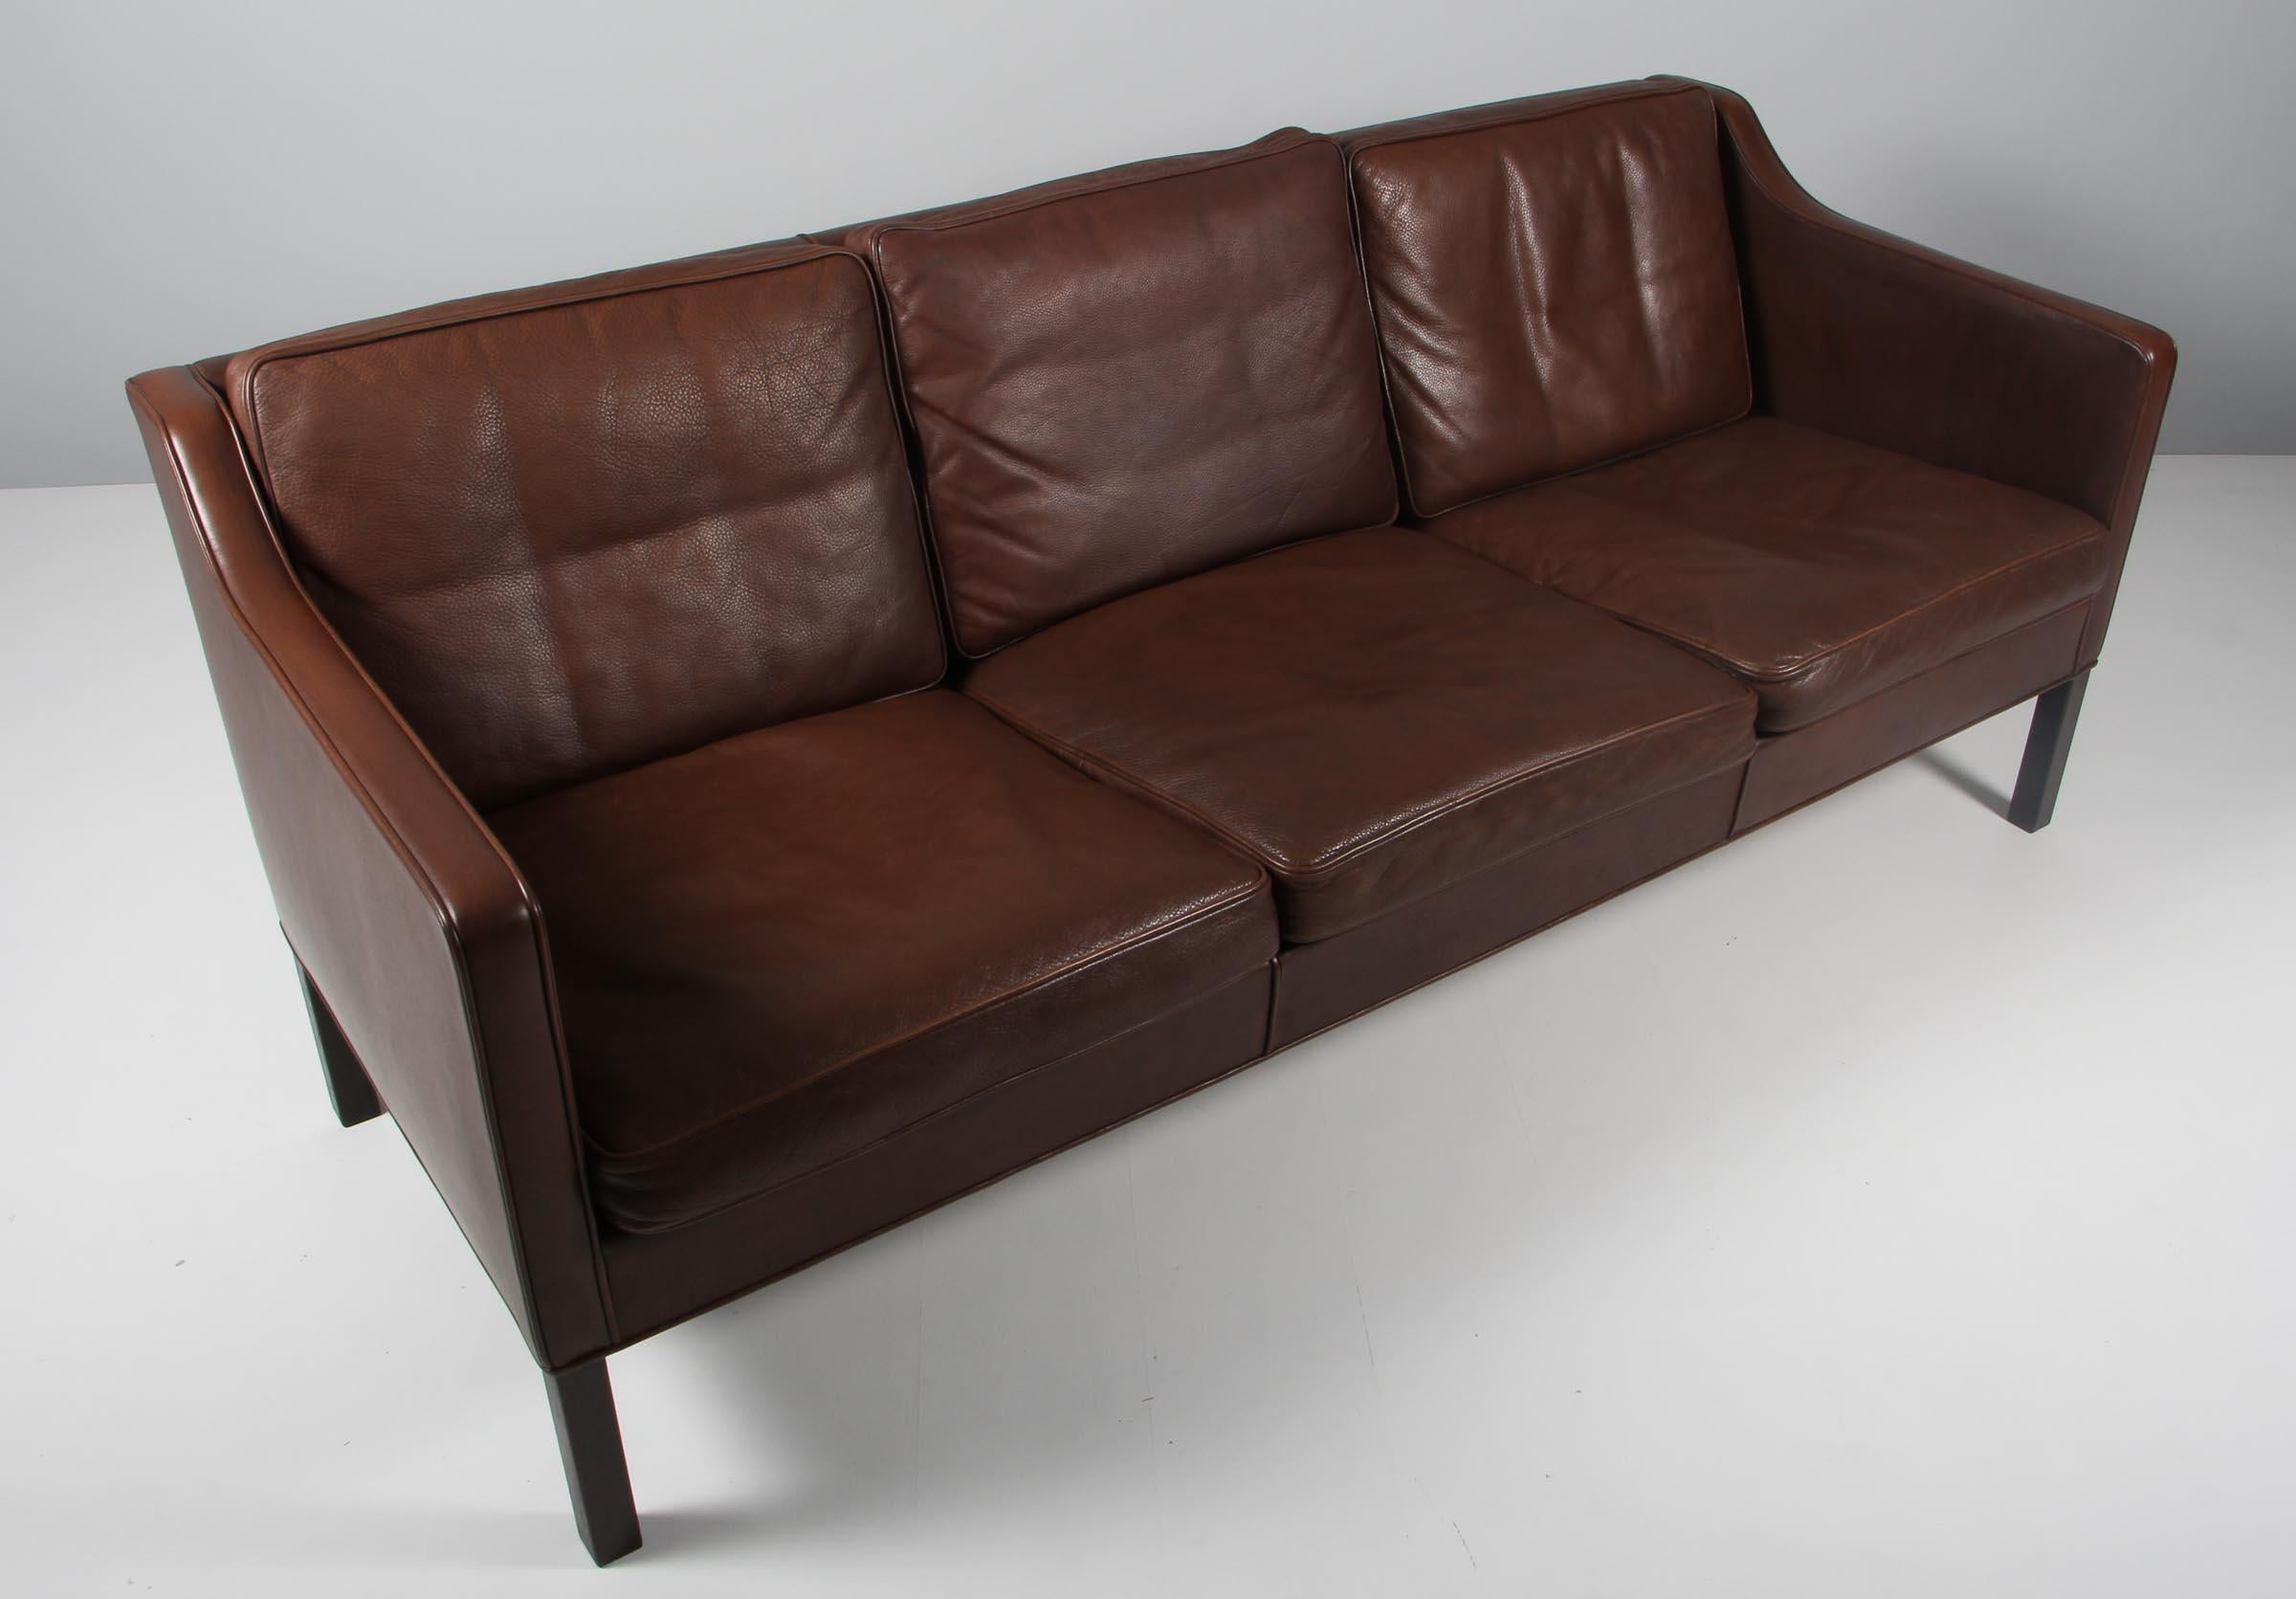 Børge Mogensen three-seat sofa original upholstered in brown leather.

Legs of smoked oak.

Model 2523, made by Fredericia Furniture.